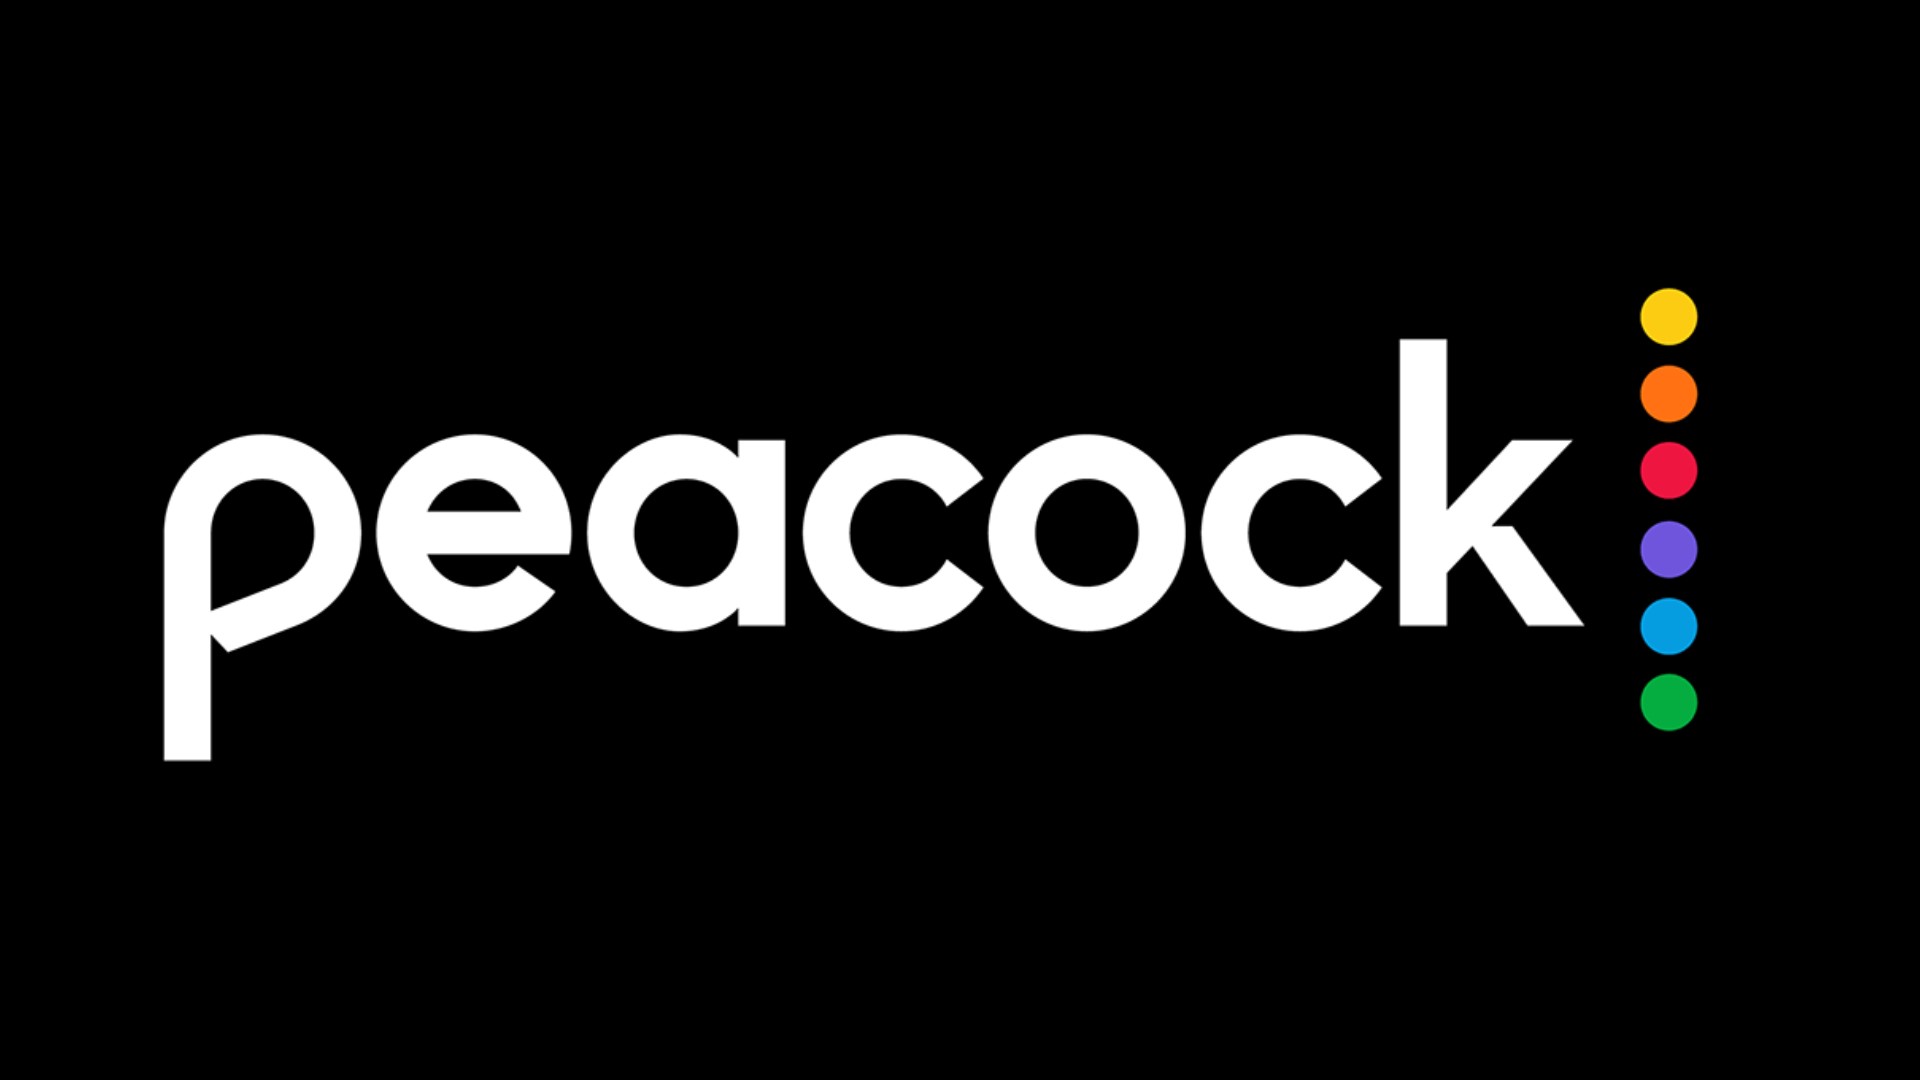 Peacock logo is large